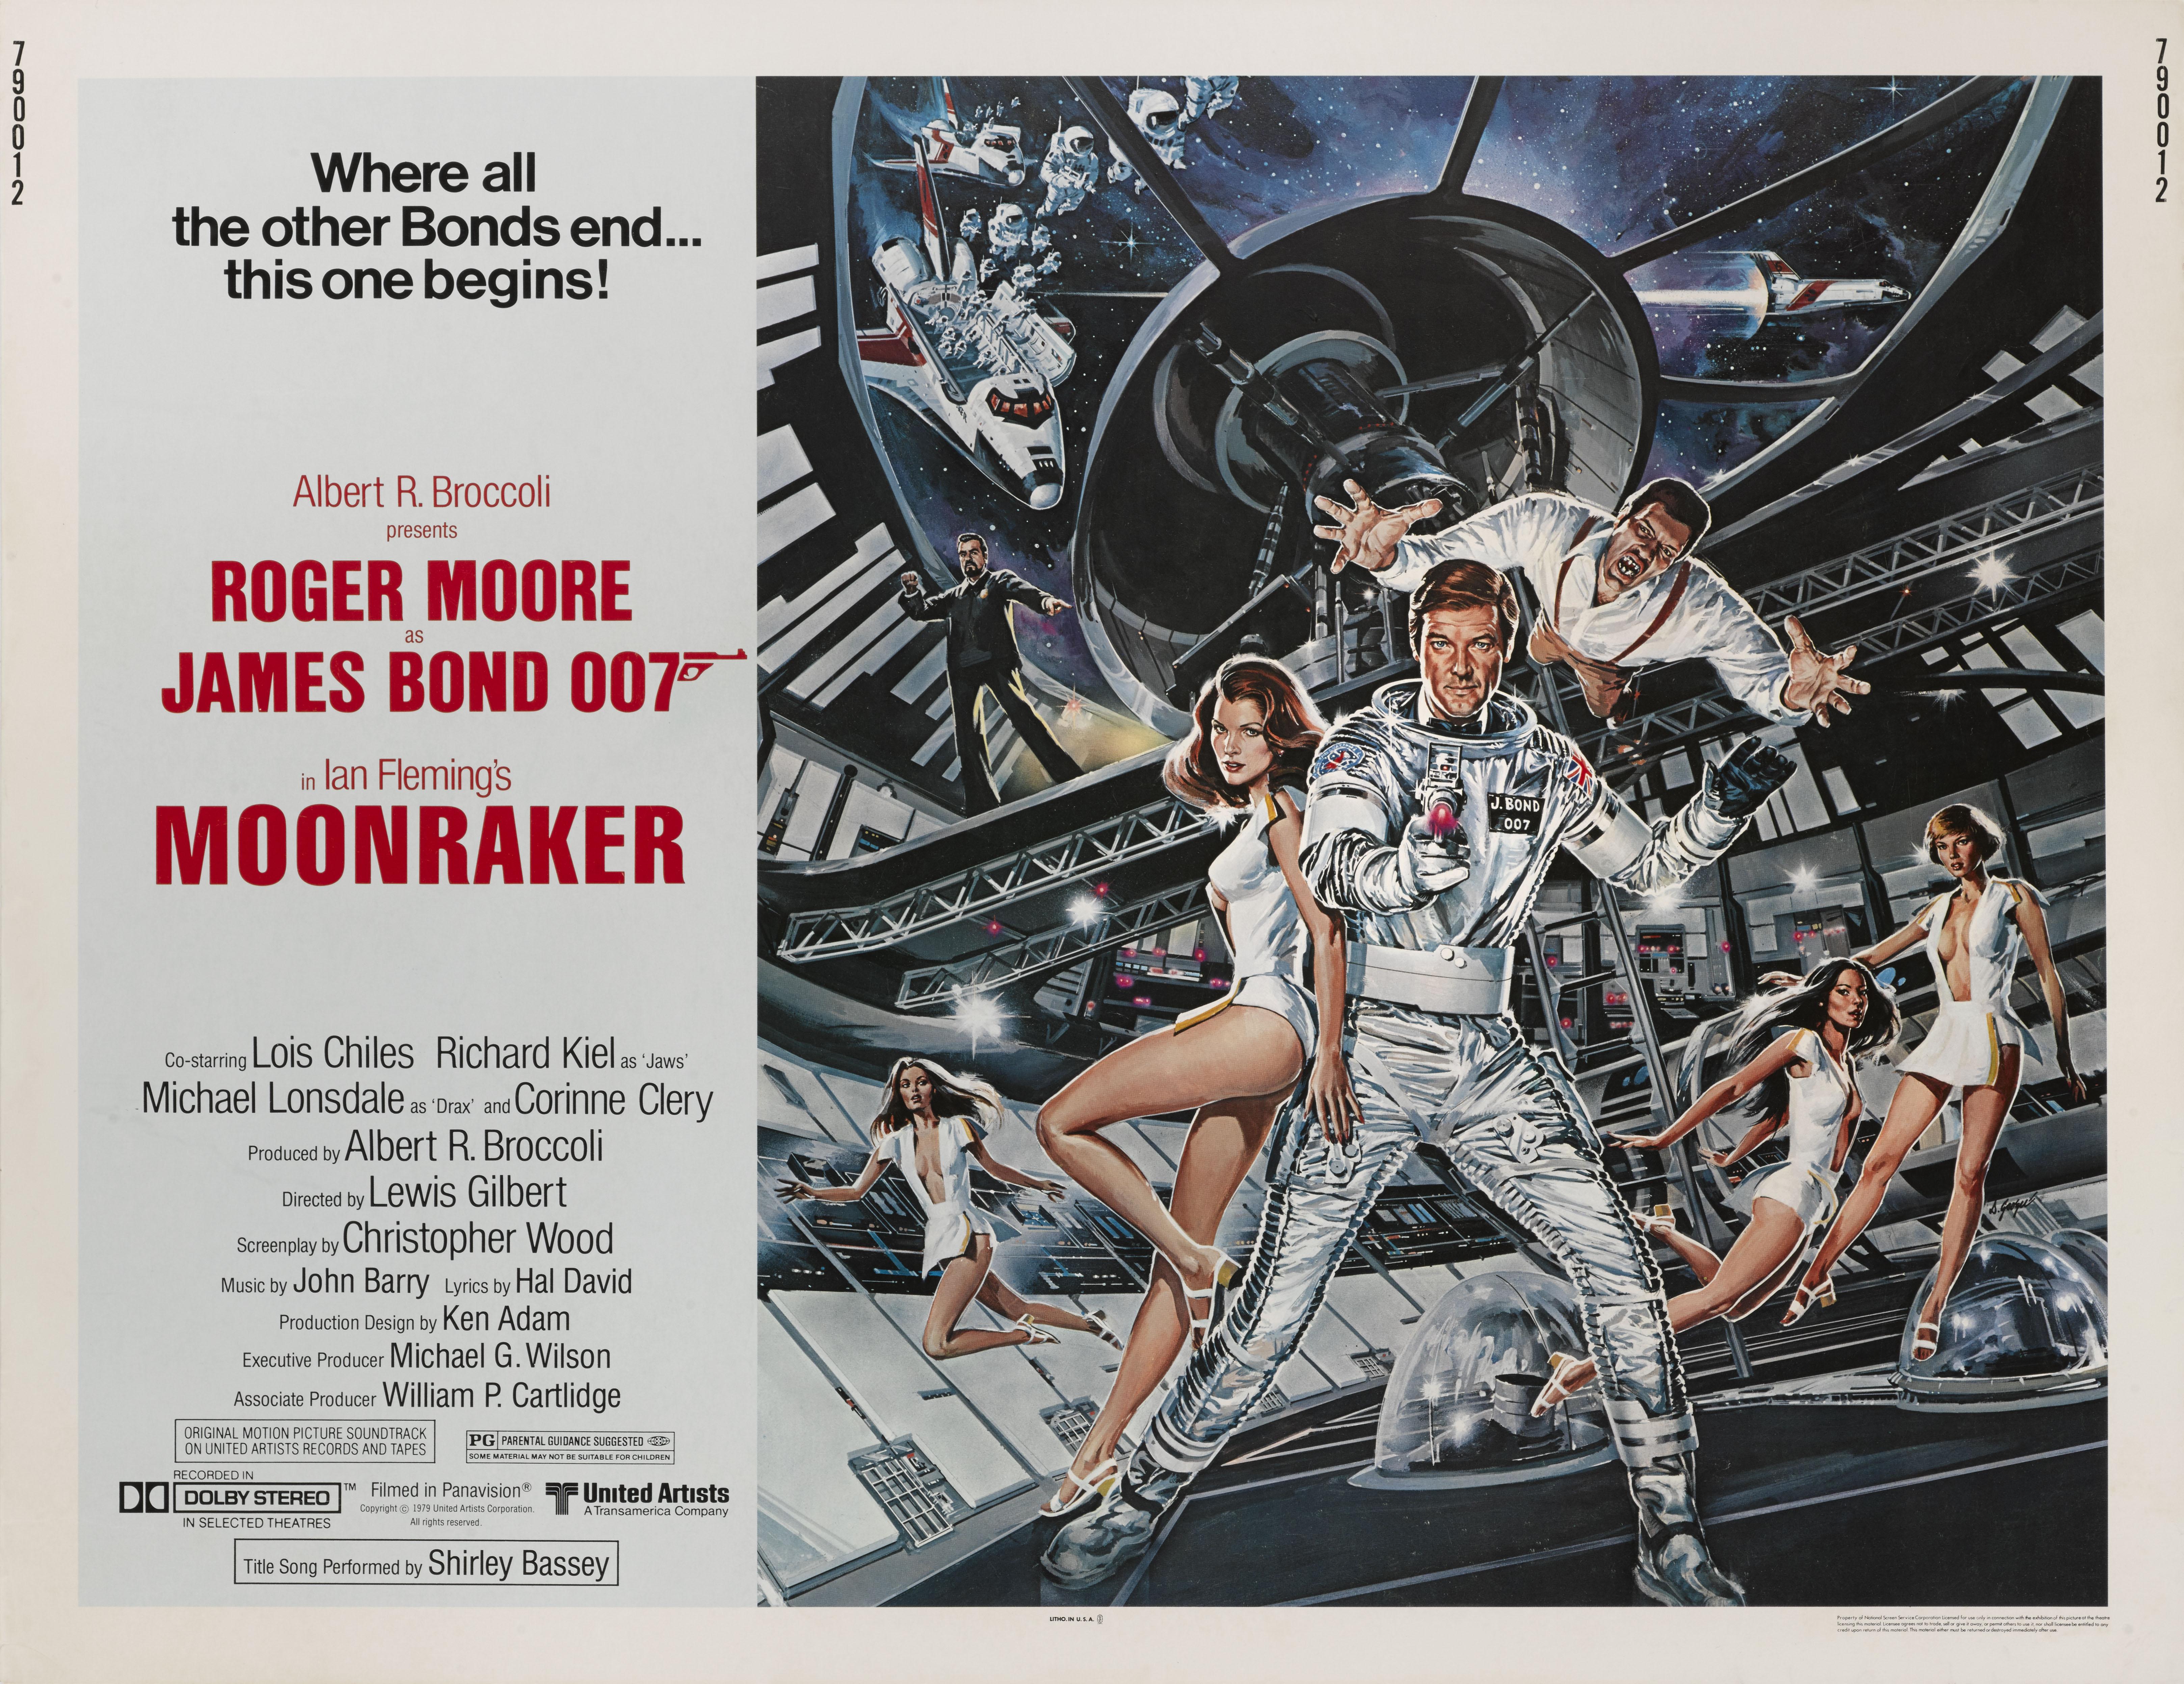 Original US film poster for Moonraker 1979.
The artwork on this poster is by Dan Goozee (b. 1943)
This film was the third and final Bond film to be directed by Lewis Gilbert. It was Eon productions eleventh James Bond film, and the fourth to star